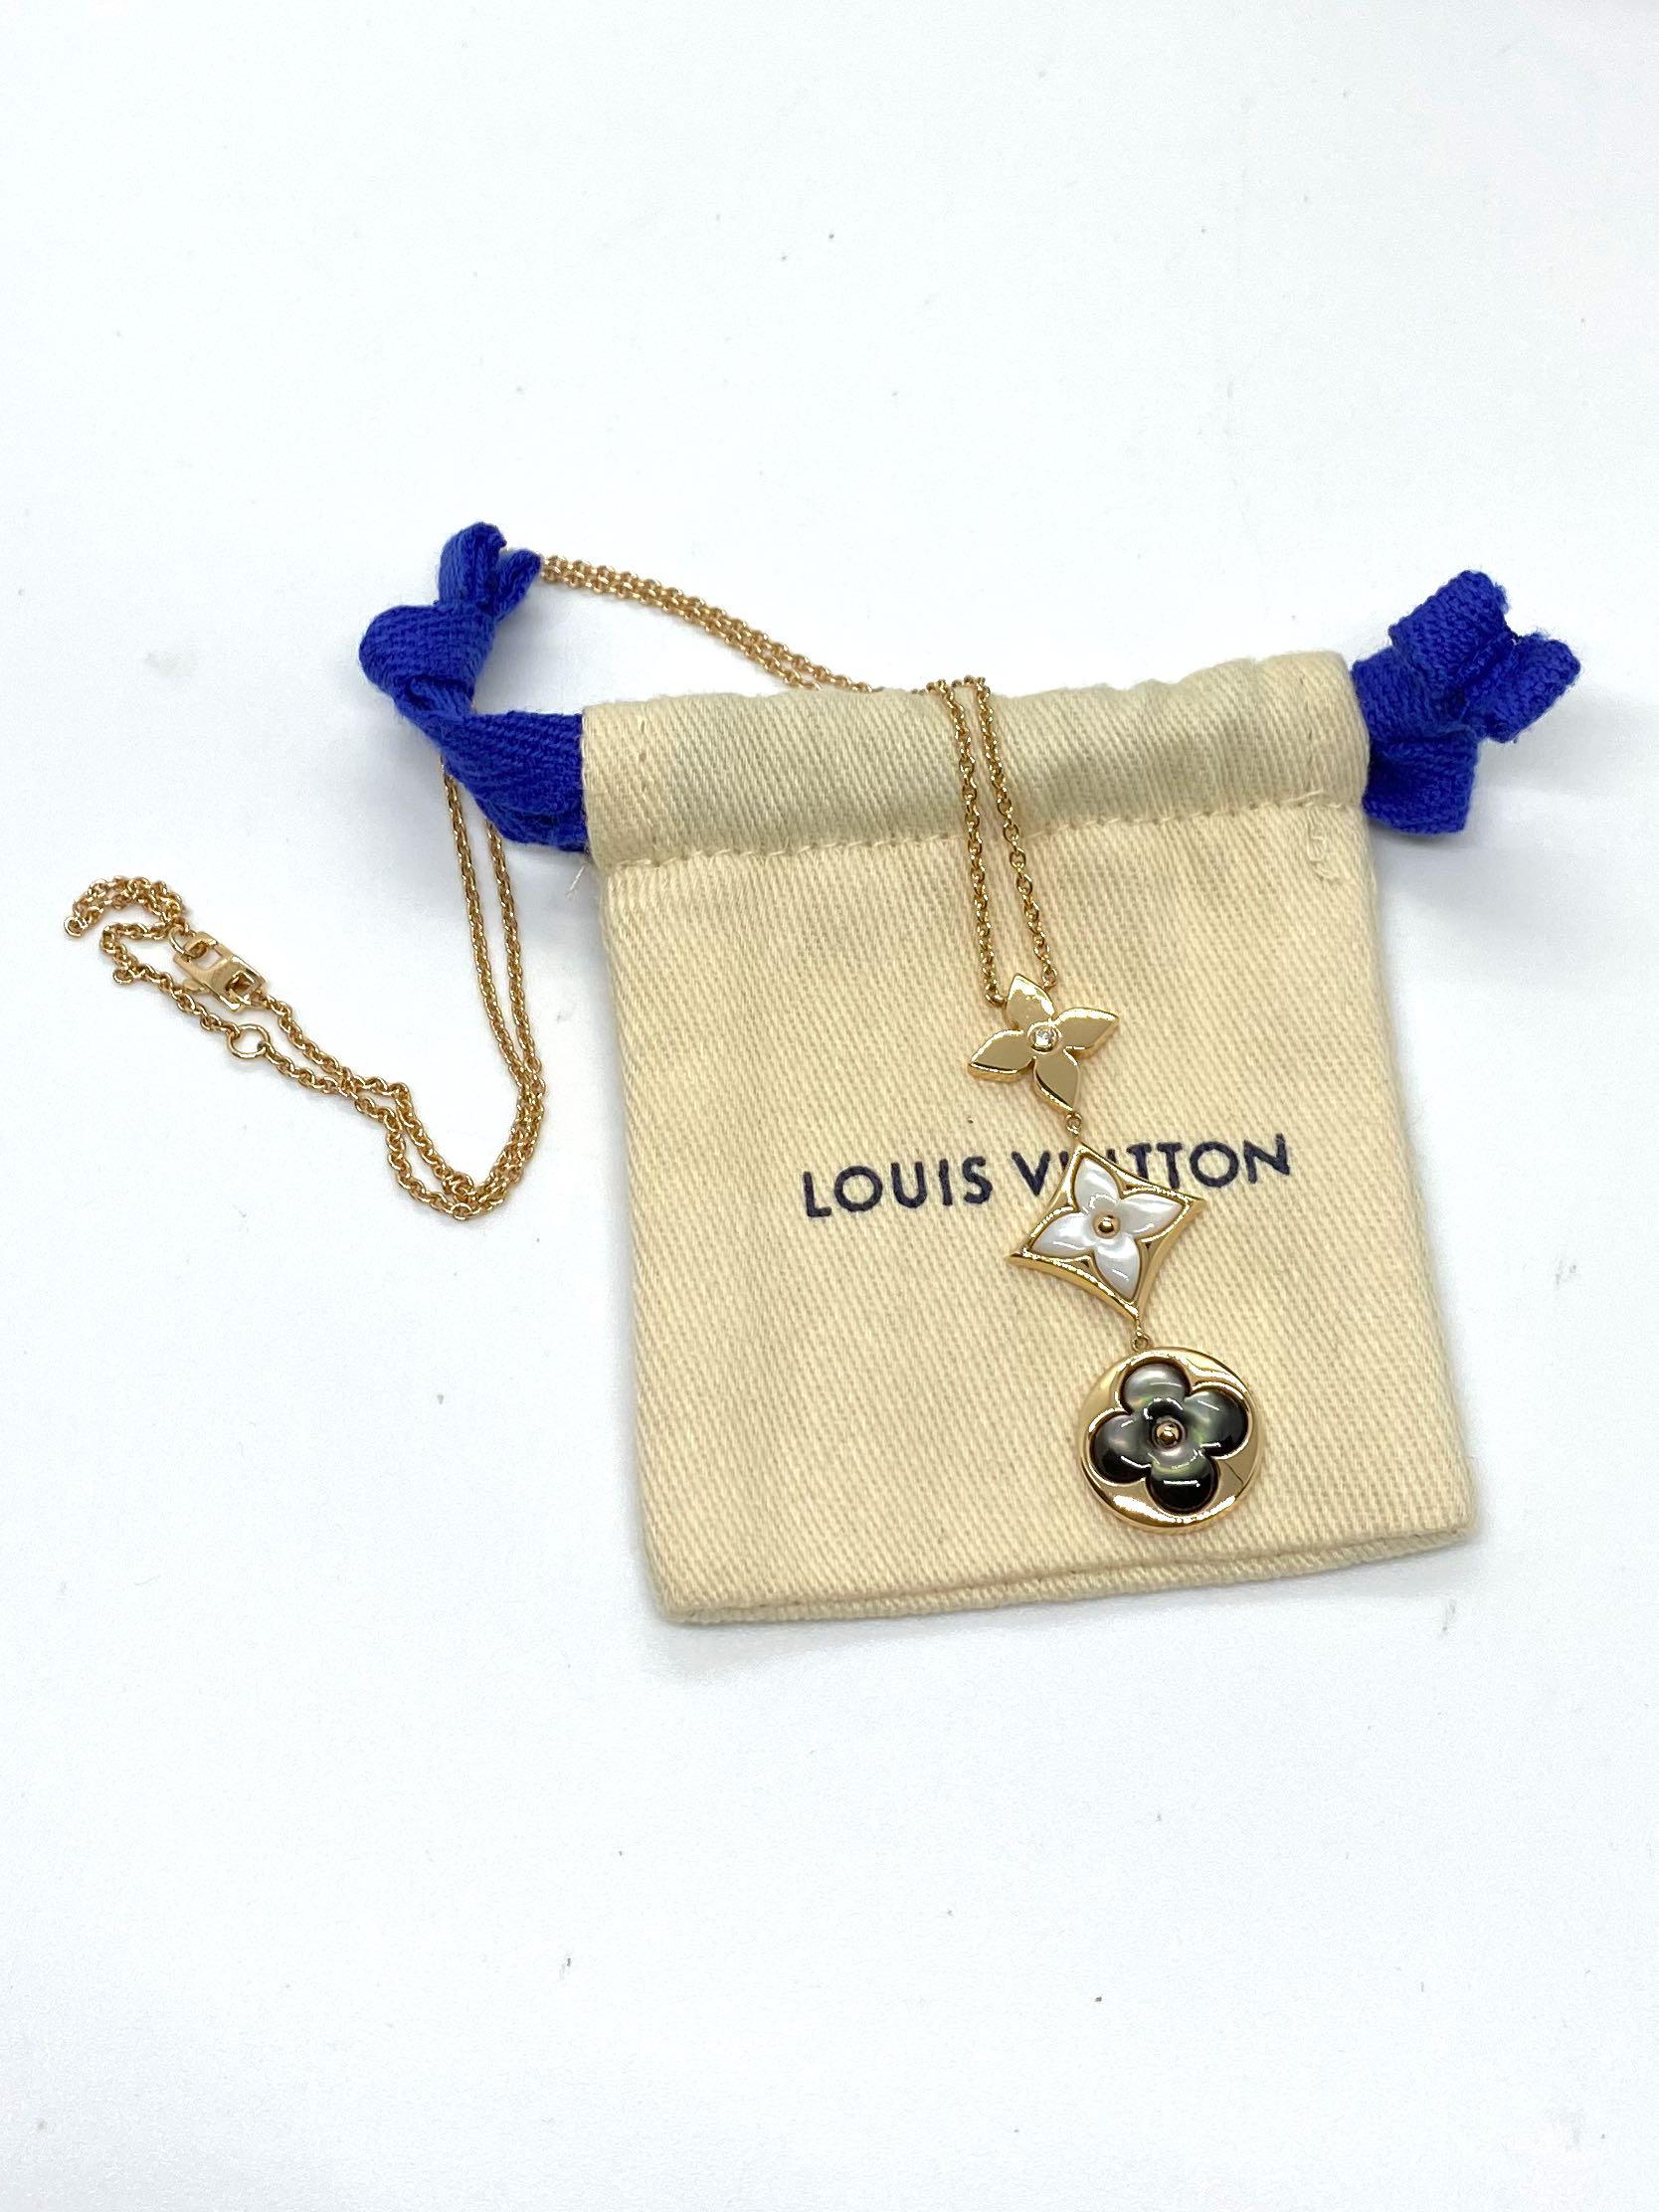 LOUIS VUITTON COLOR BLOSSOM LARIAT PG NECKLACE WHITE MOTHER-OF-PEARL  DIAMOND /12,4g /207011185 •